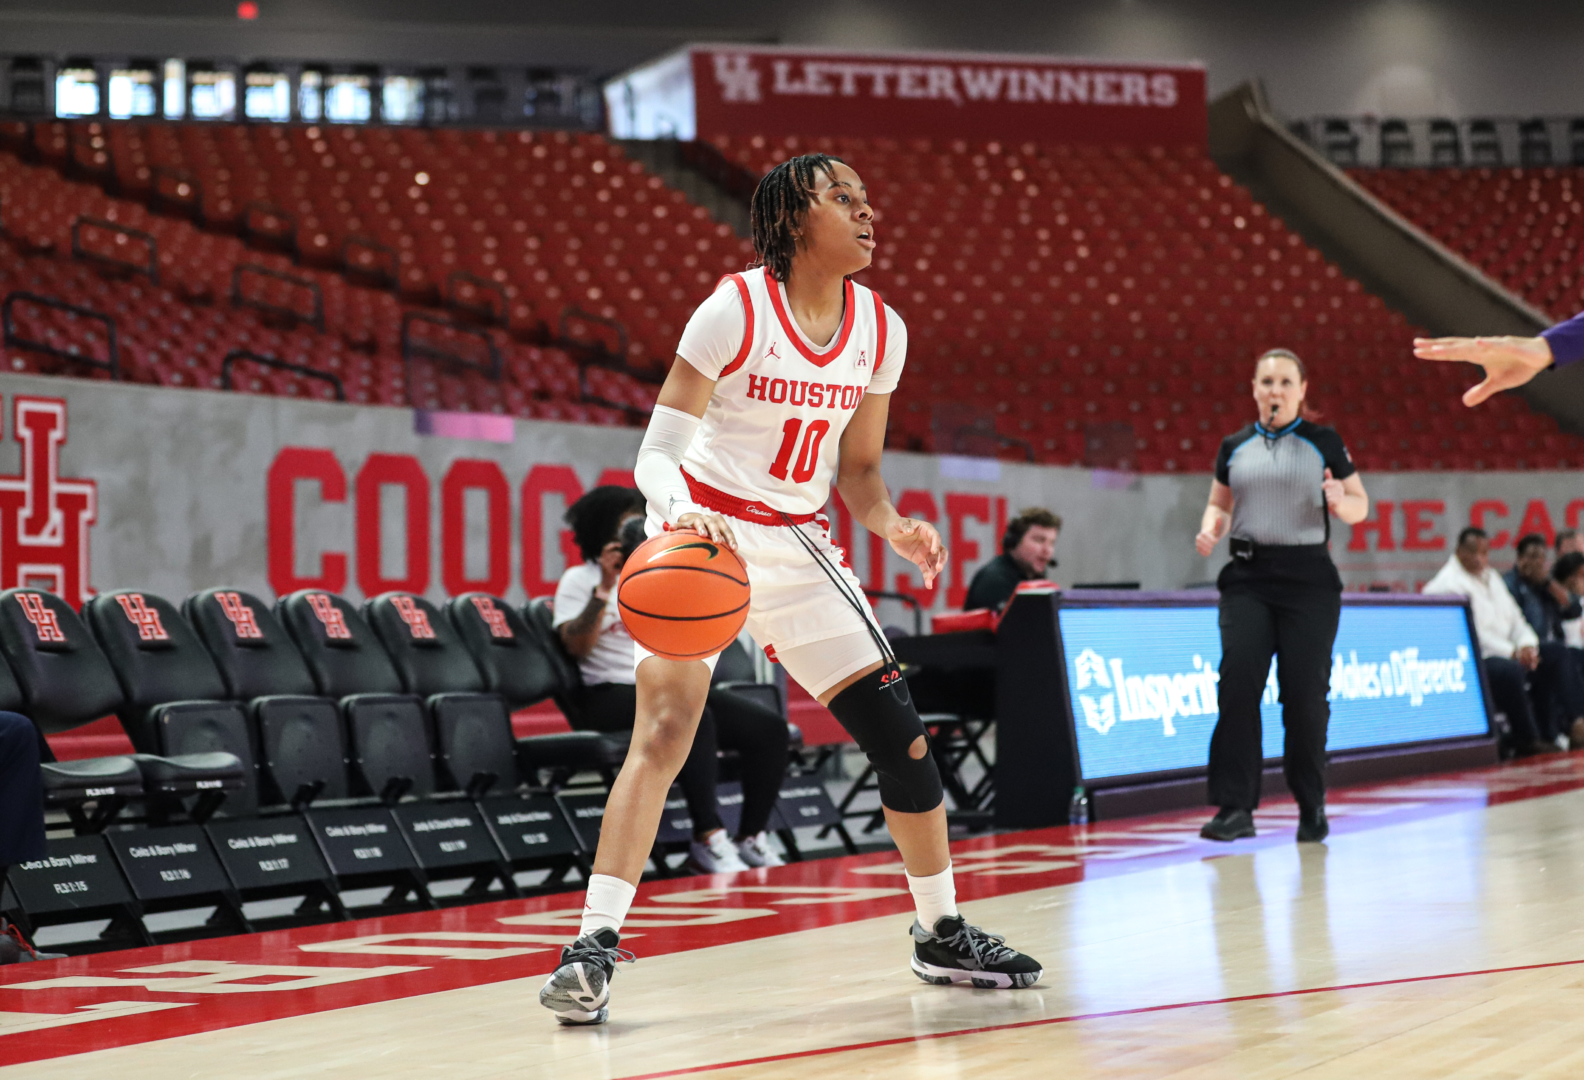 UH women's basketball defeated Texas A&M Commerce for its fist win of the season. | Sean Thomas/The Cougar